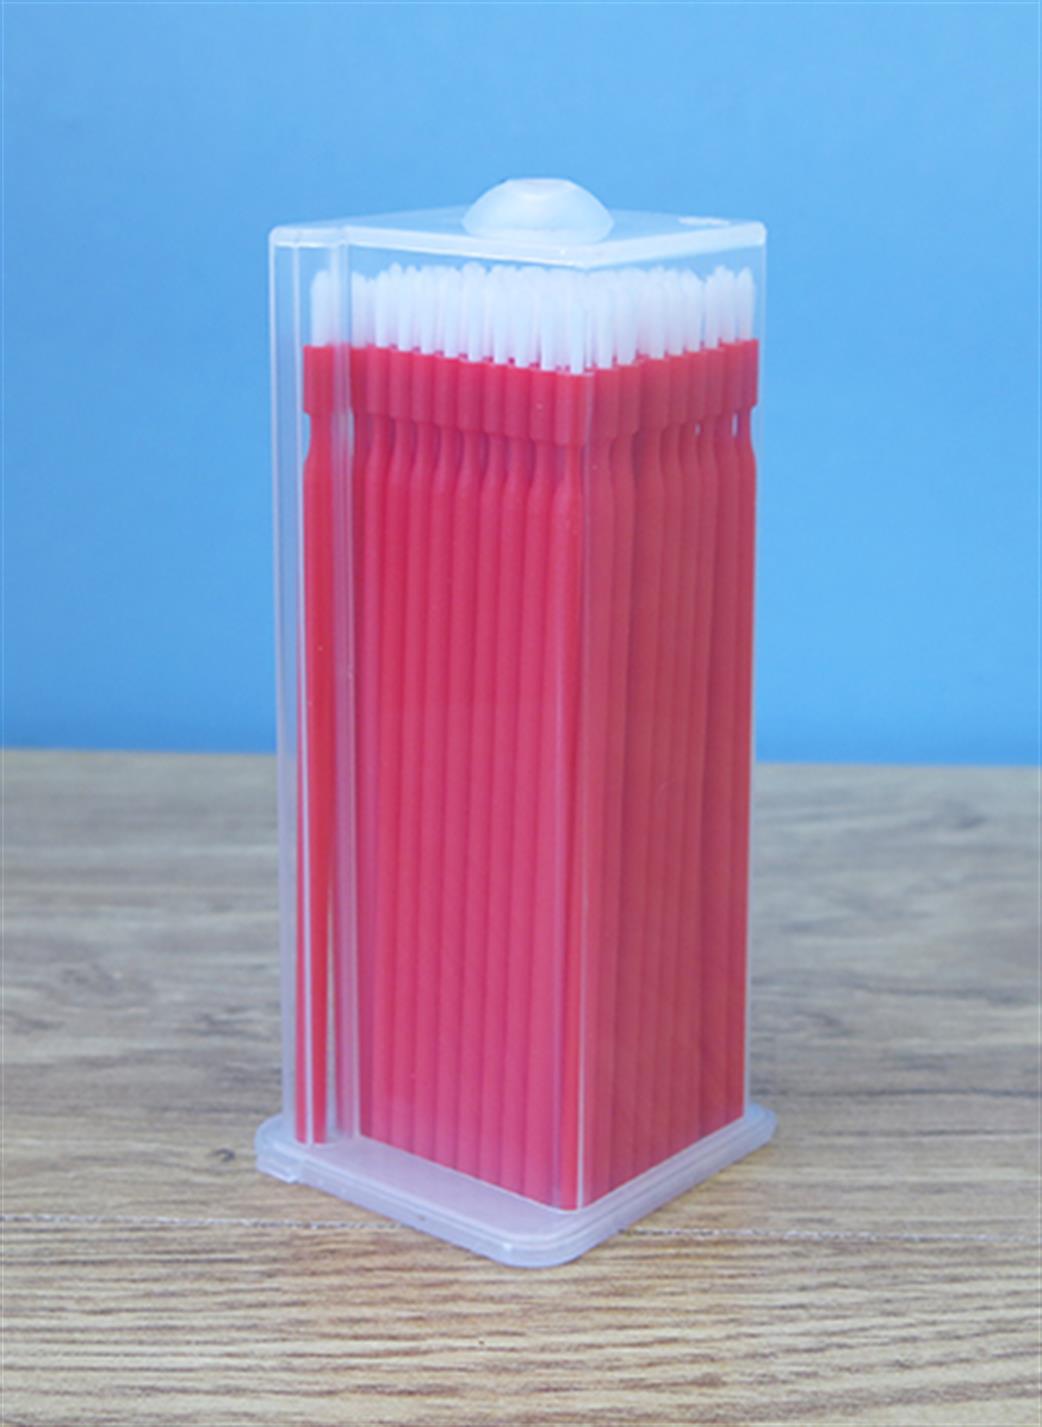 Expo  A45822 Dispenser Box containing 100 Medium Size Bendable Micro Brushes